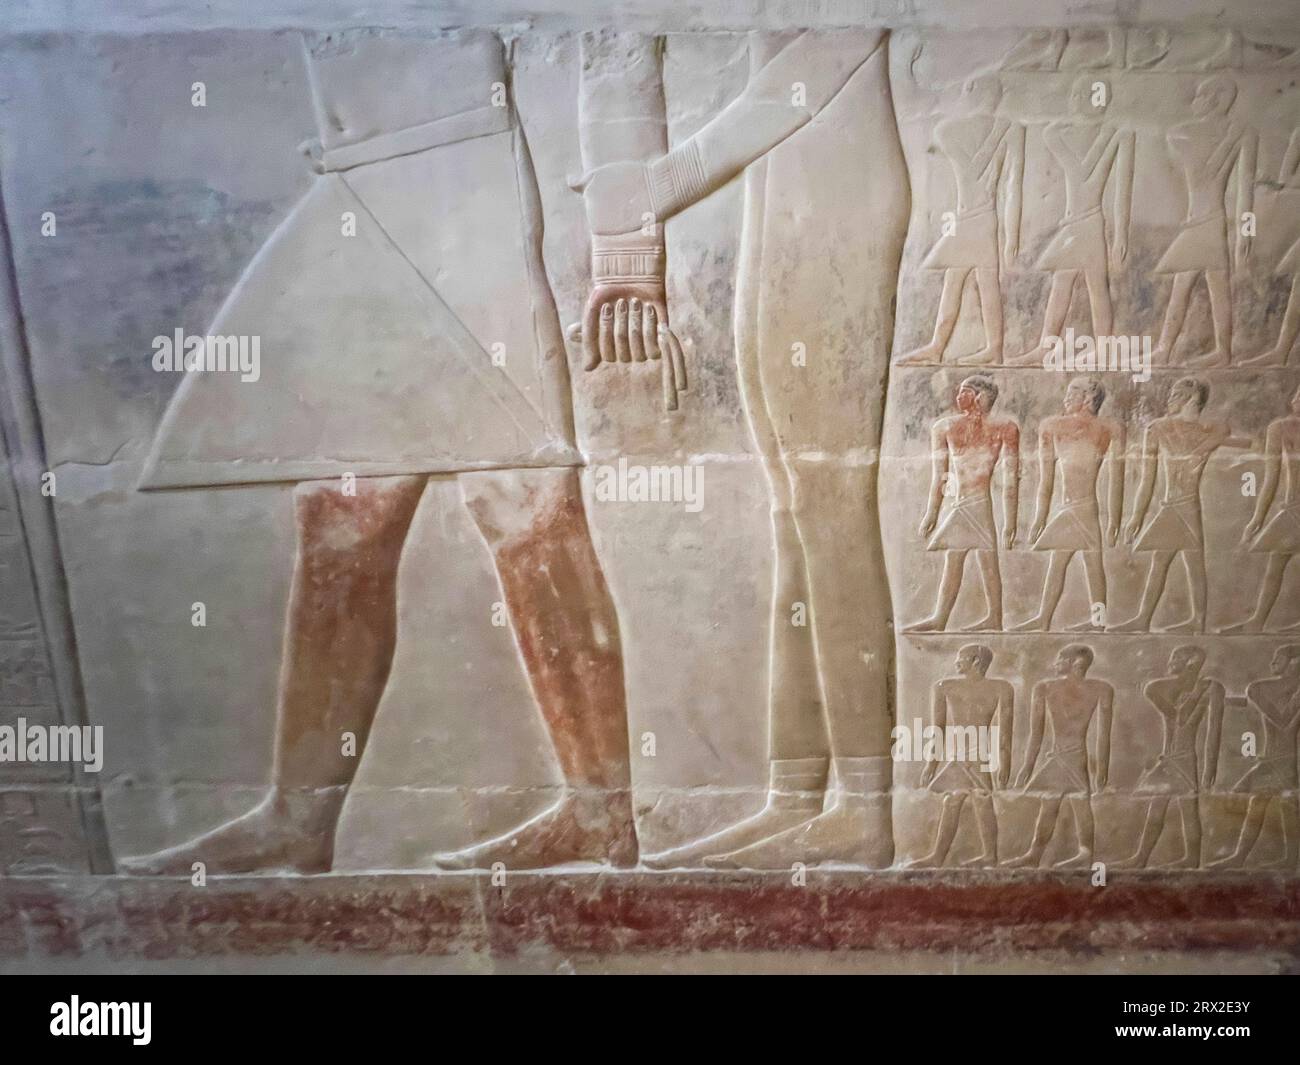 Relief from a tomb in Saqqara, part of the Memphite Necropolis, UNESCO World Heritage Site, Egypt, North Africa Africa Stock Photo